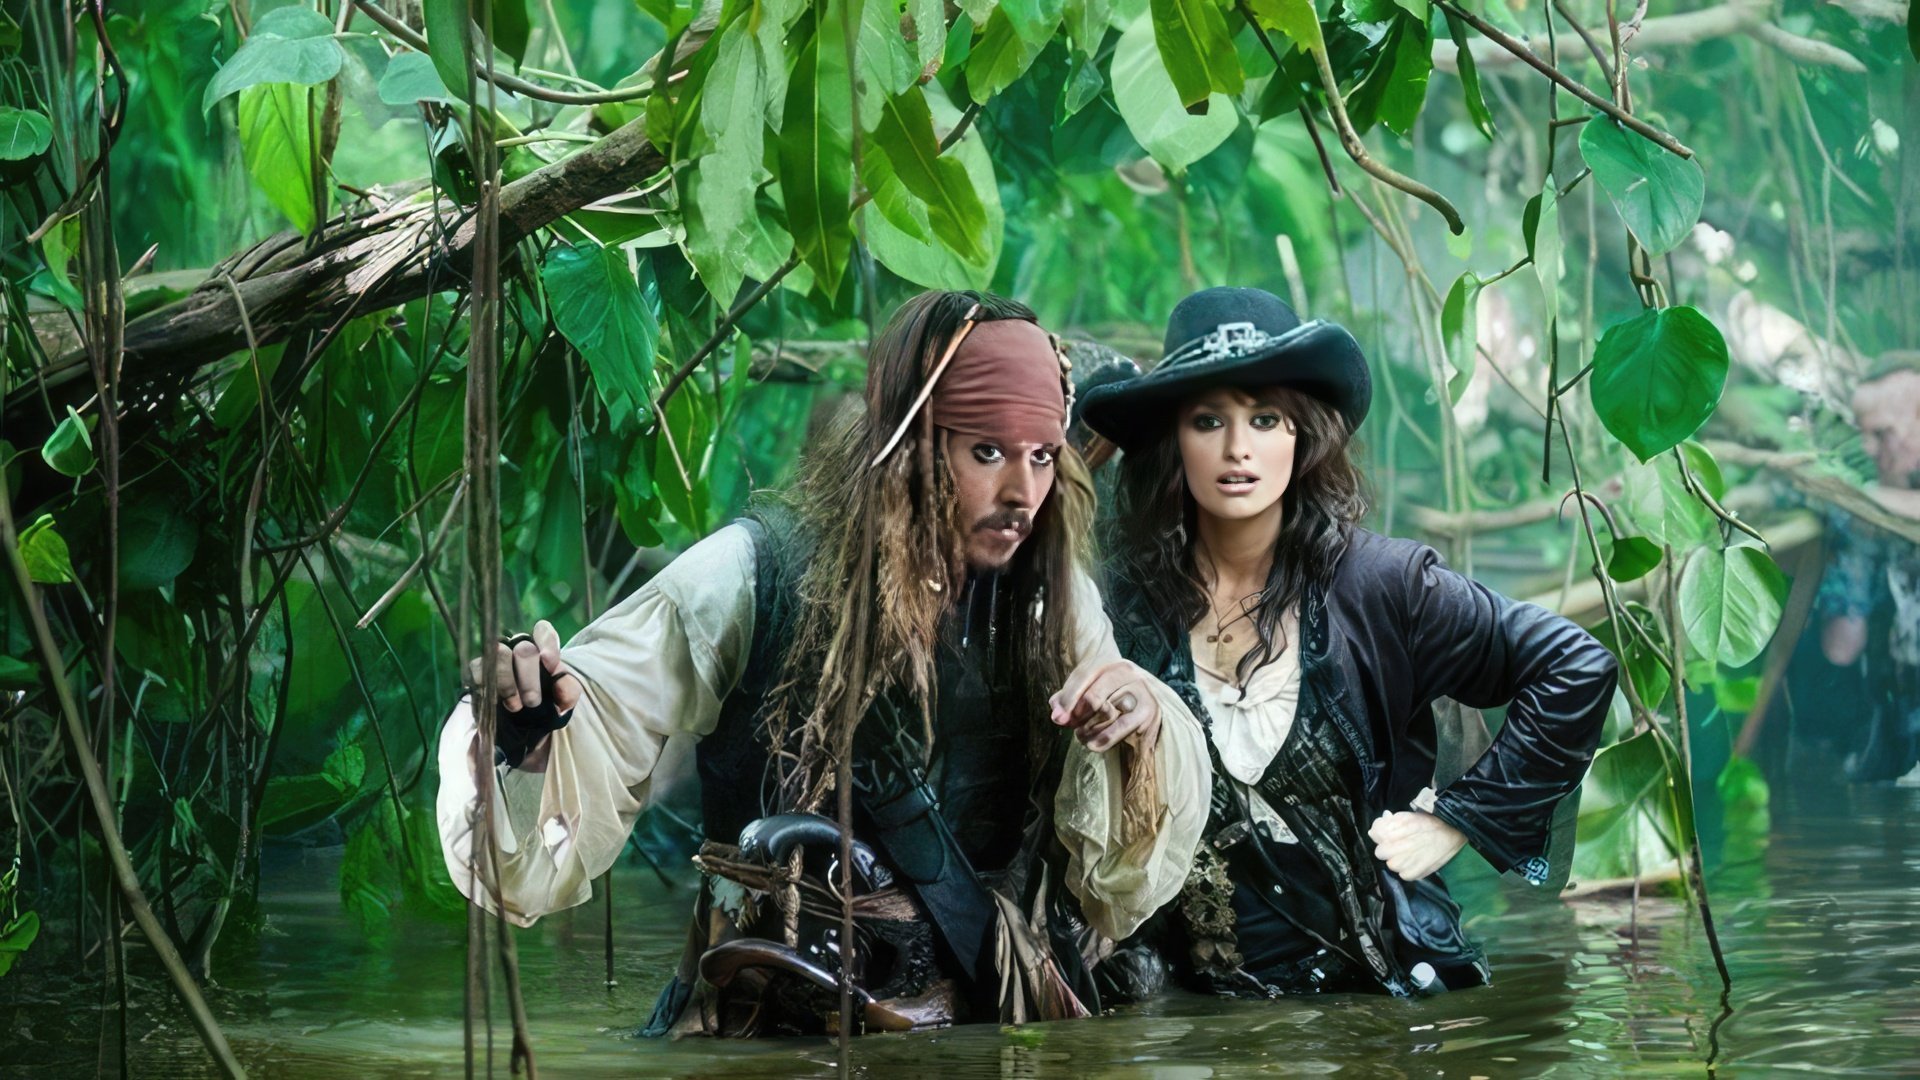 Penelope Cruz and Johnny Depp in 'Pirates of the Caribbean: On Stranger Tides'